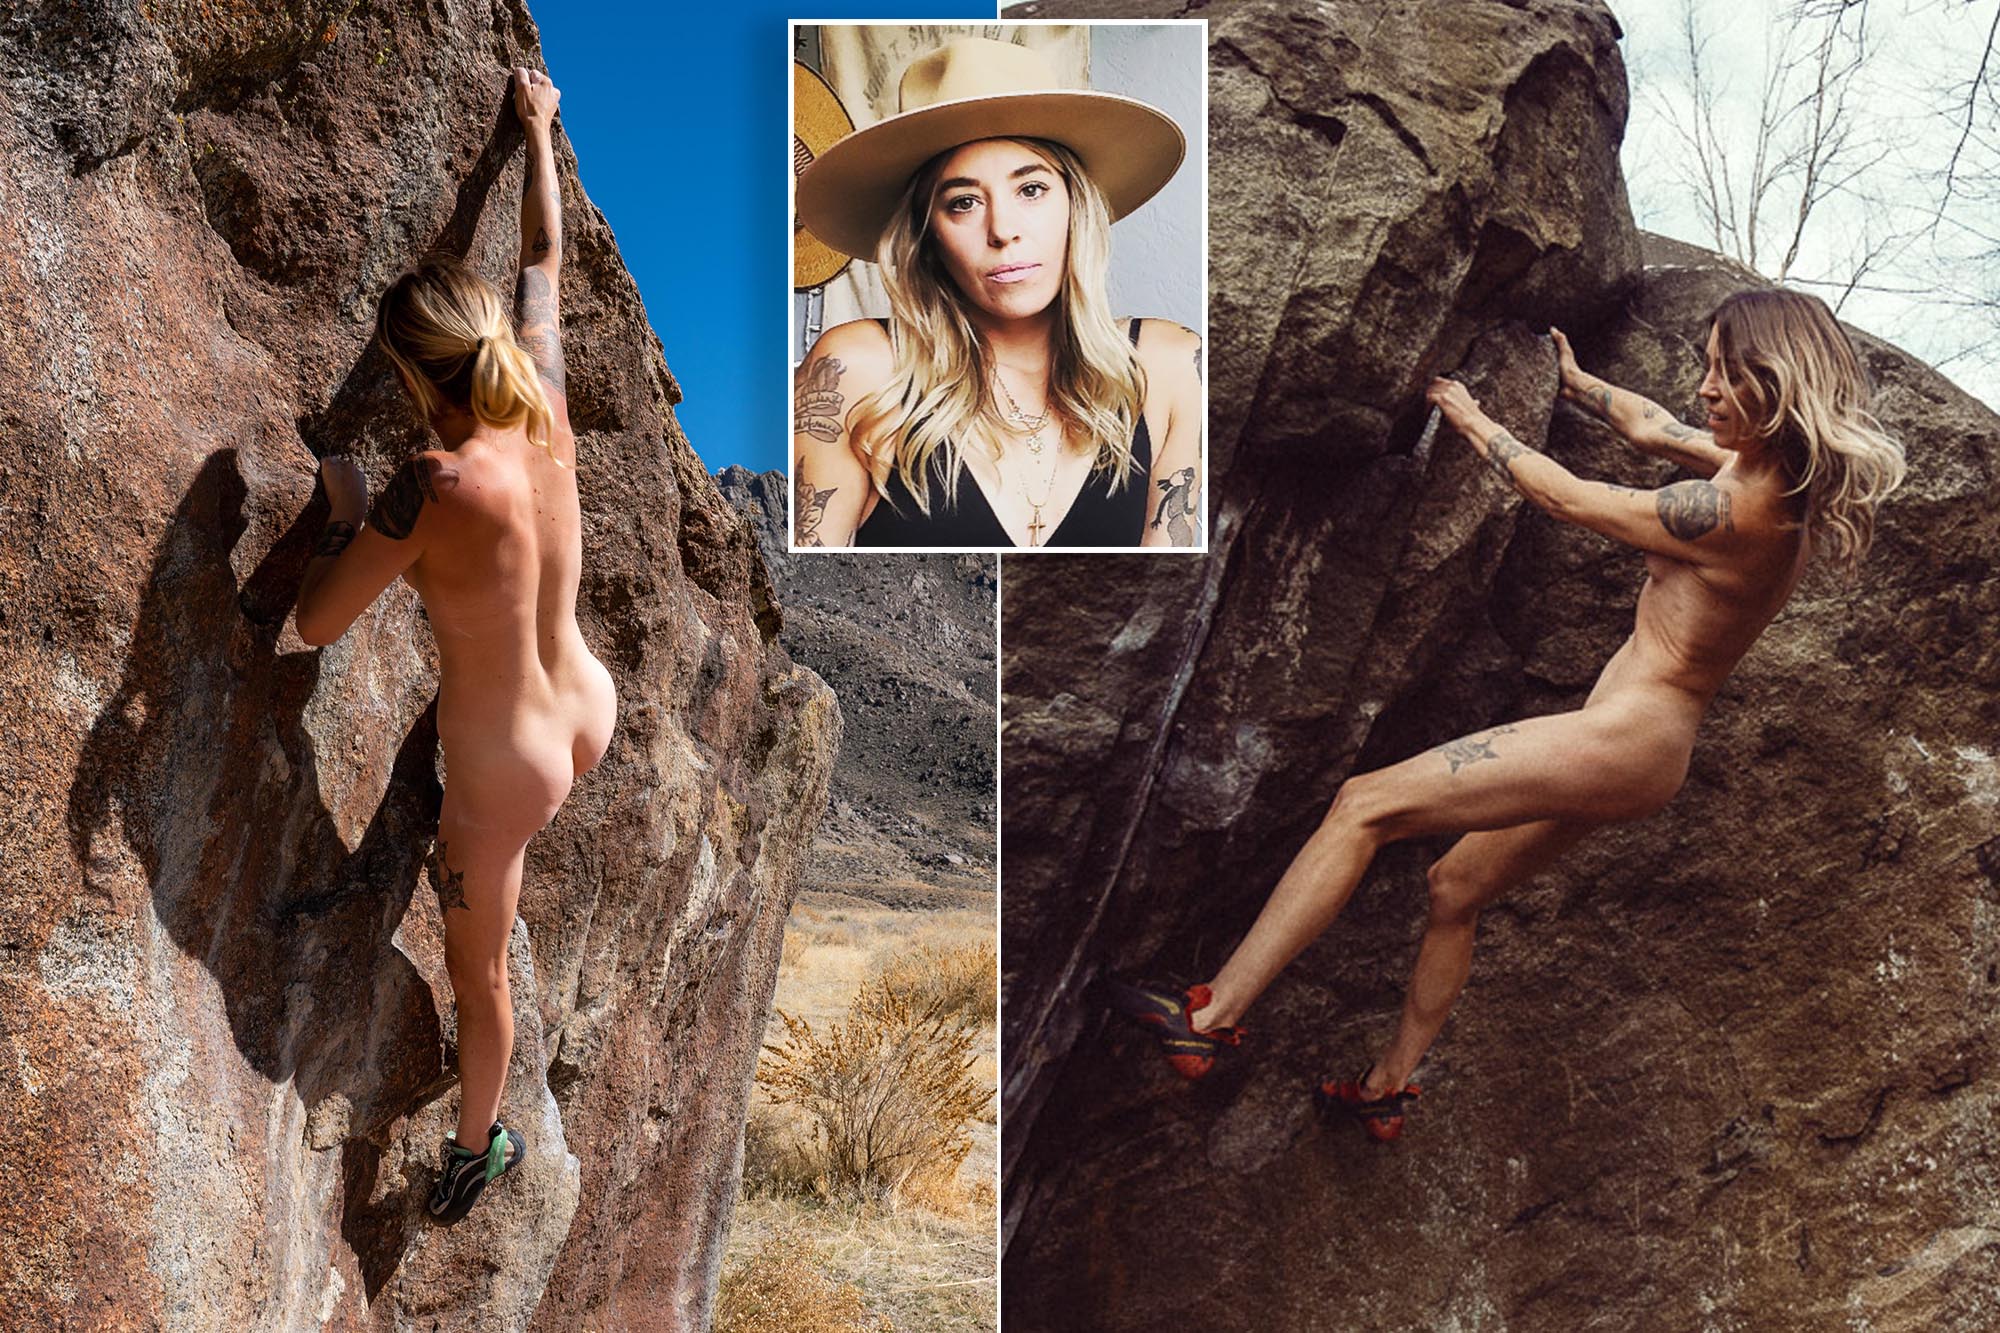 dianne tagra recommends nude women rock climbing pic